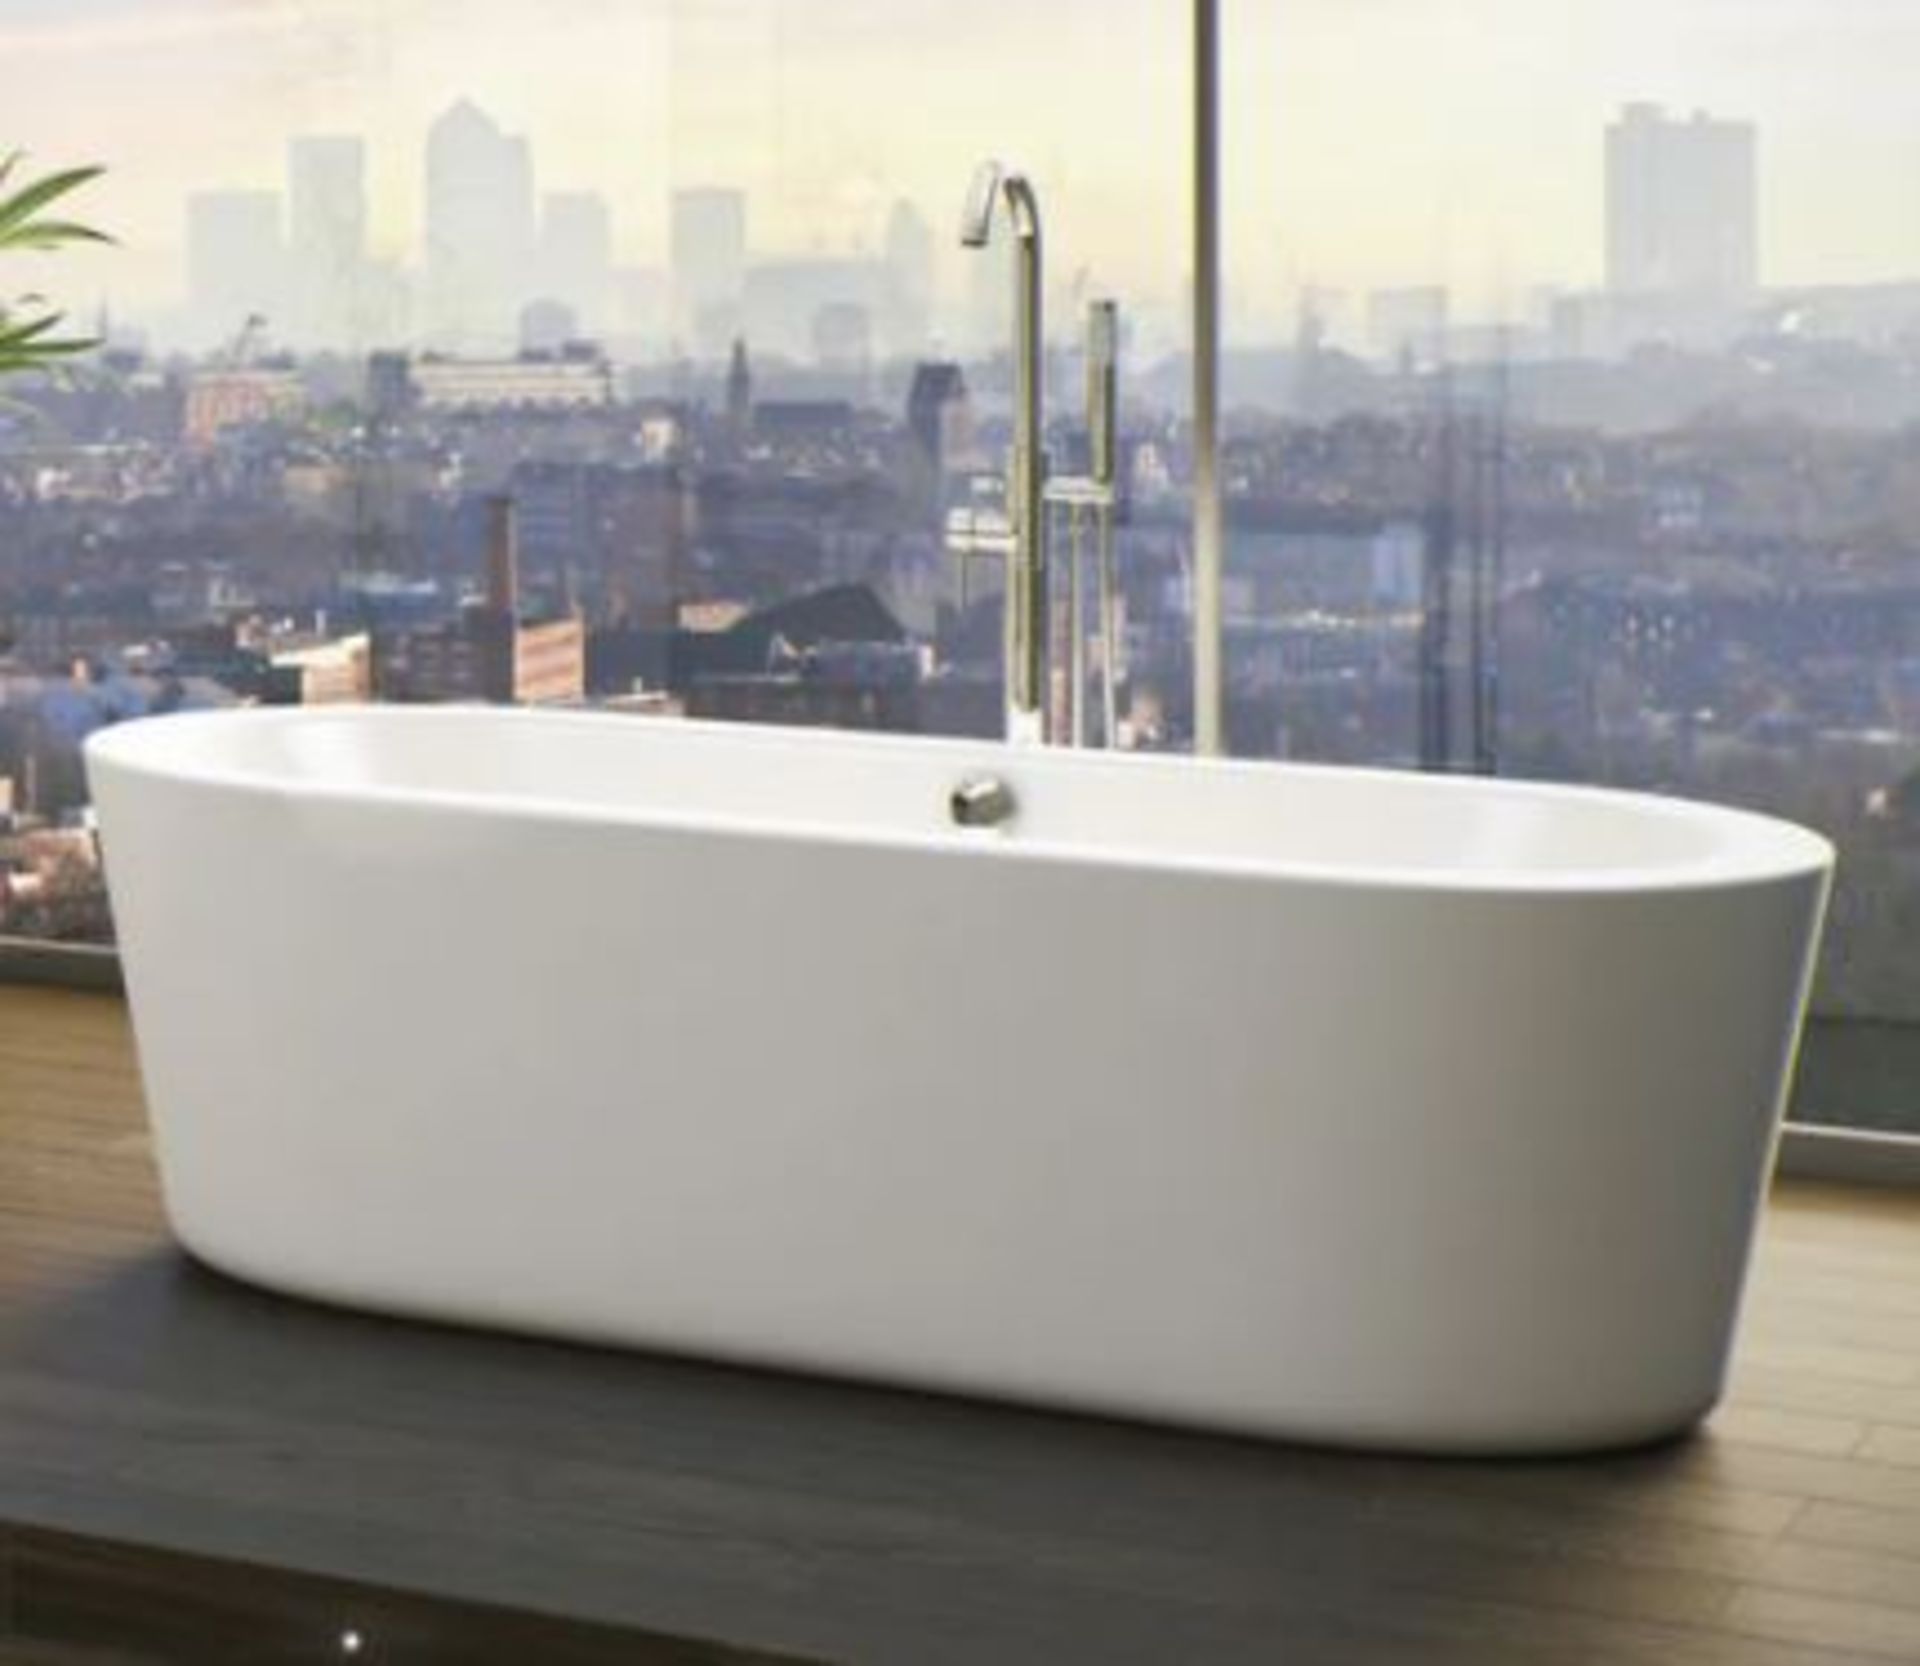 1 X Crescent Roll Top Bath Large (rtb08)RRP £559 - Image 4 of 7